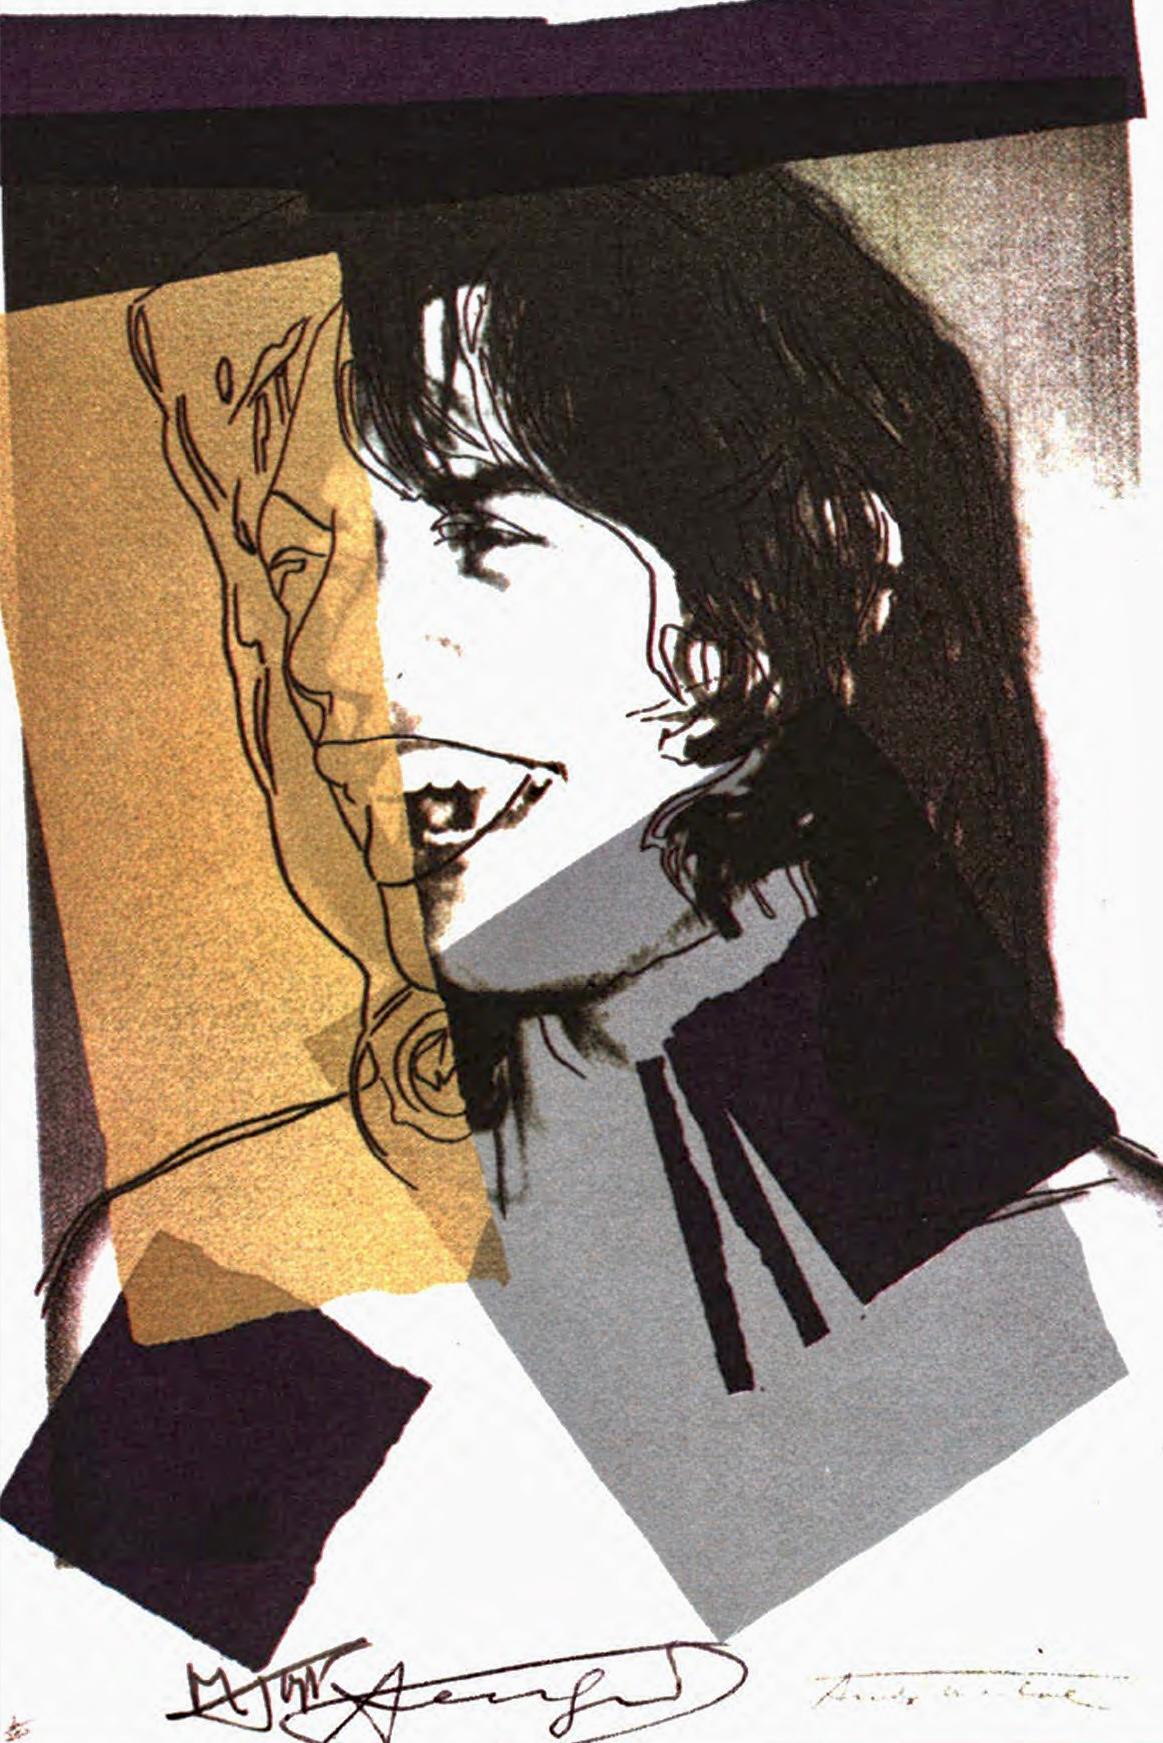 Andy Warhol Mick Jagger Leo Castelli gallery 1975:

A stunning Andy Warhol Mick Jagger announcement card hand signed by Warhol in marker on the lower center (in between a Jagger & Warhol printed signature). This work was published by Castelli